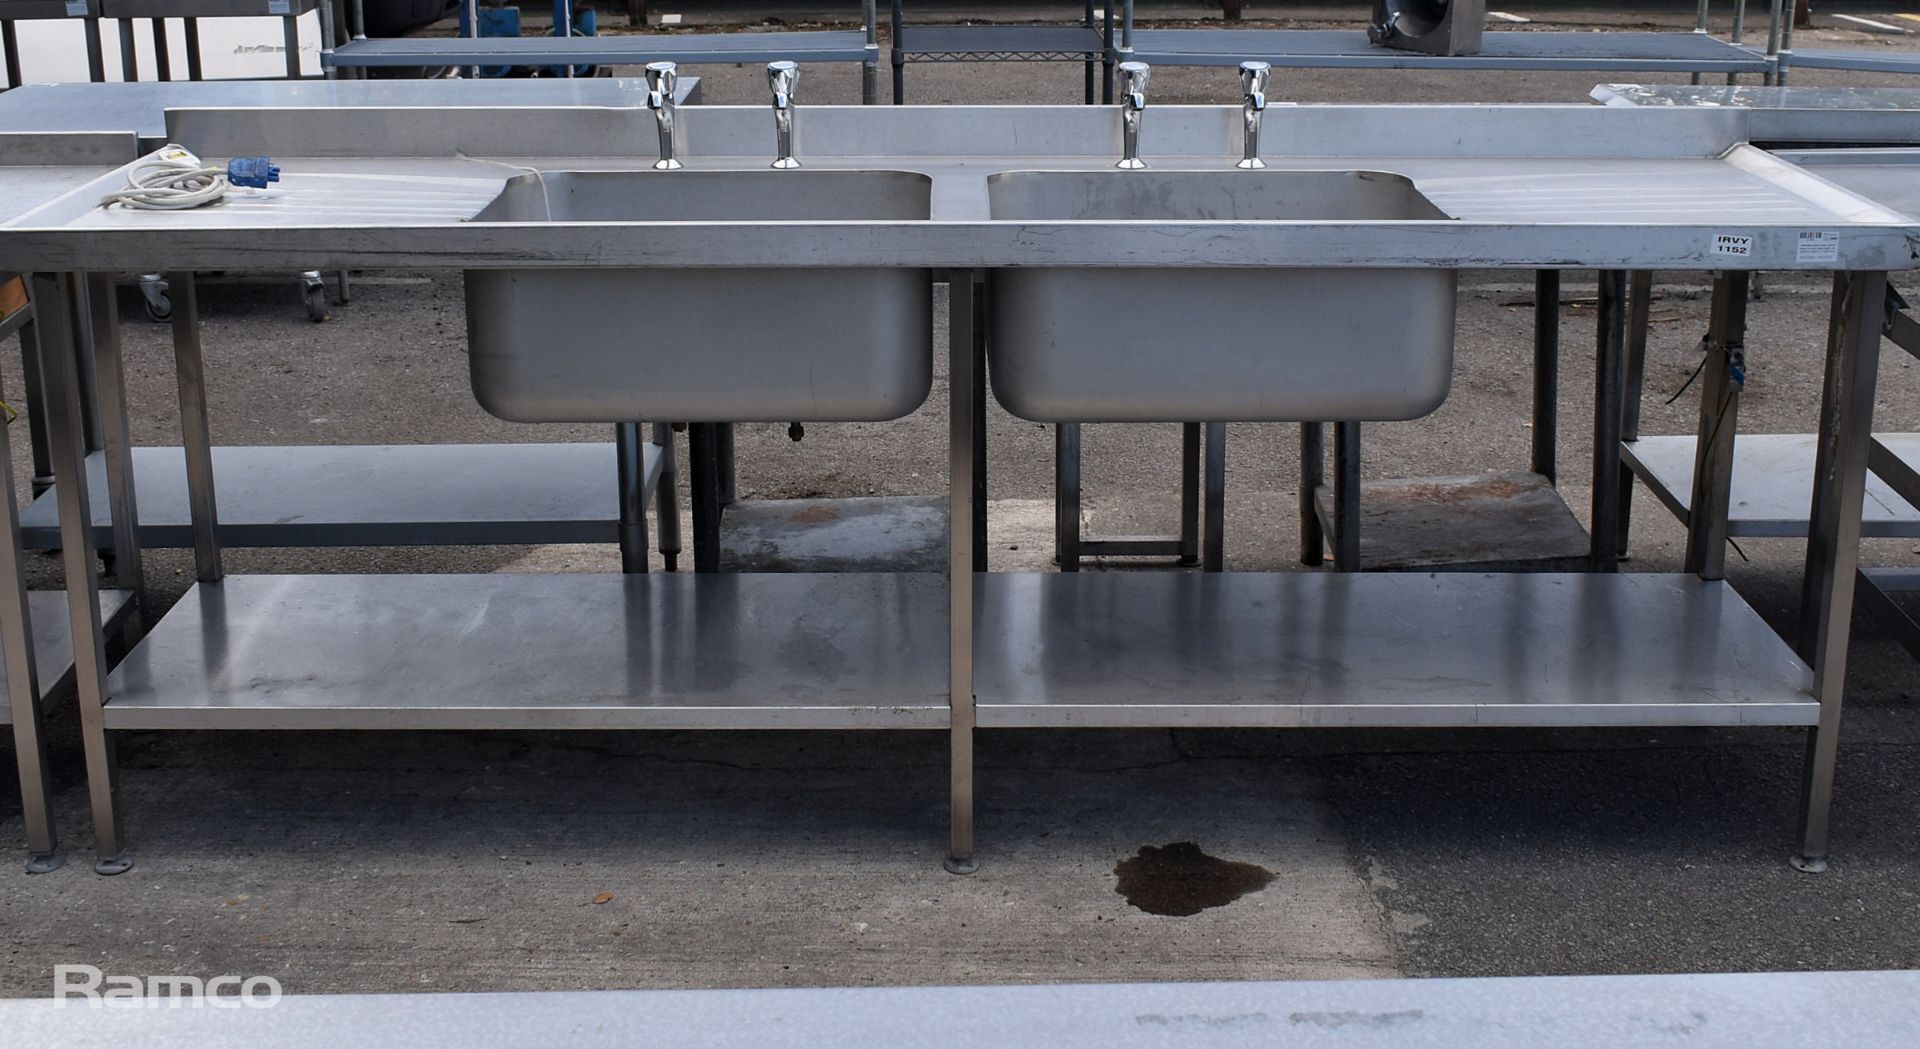 Stainless steel large double sink unit with lower shelf - W 2400 x D 650 x H 1030mm